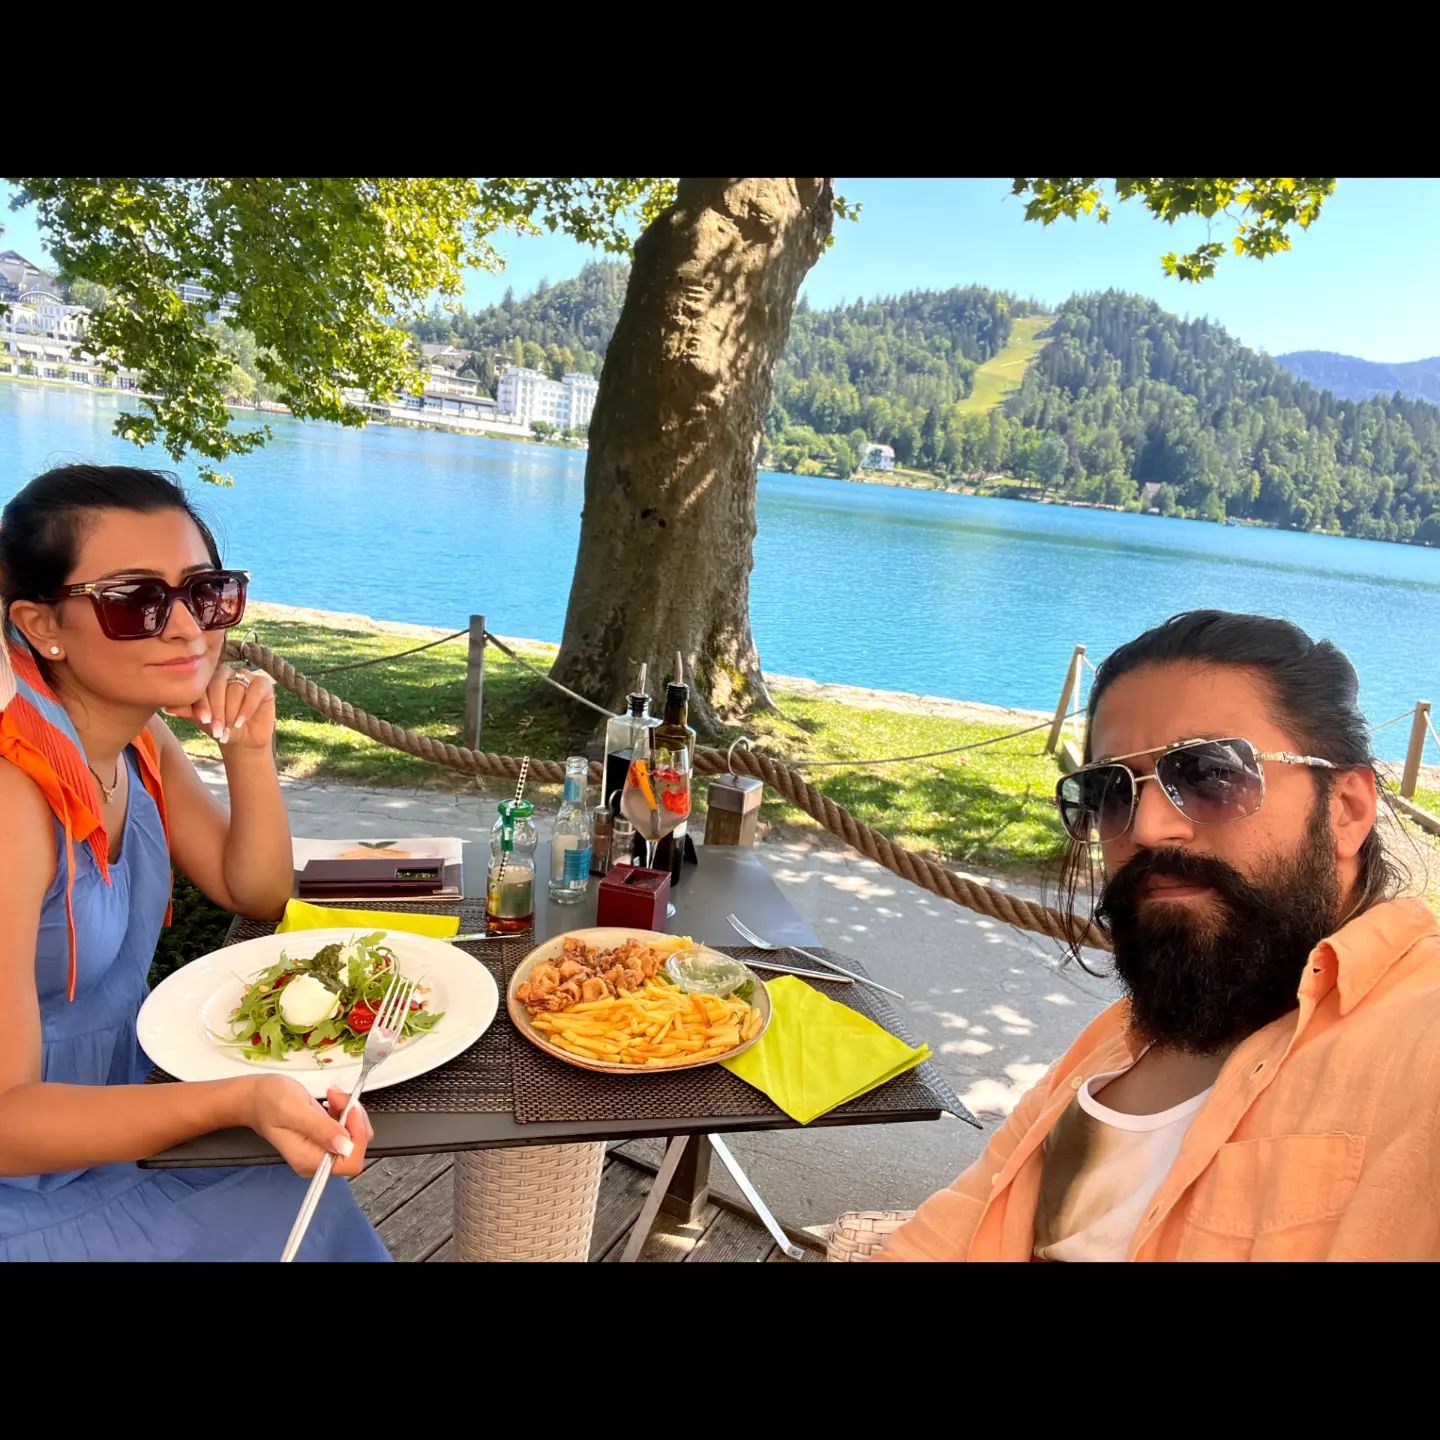 KGF star yash enjoying vacation with wife photos